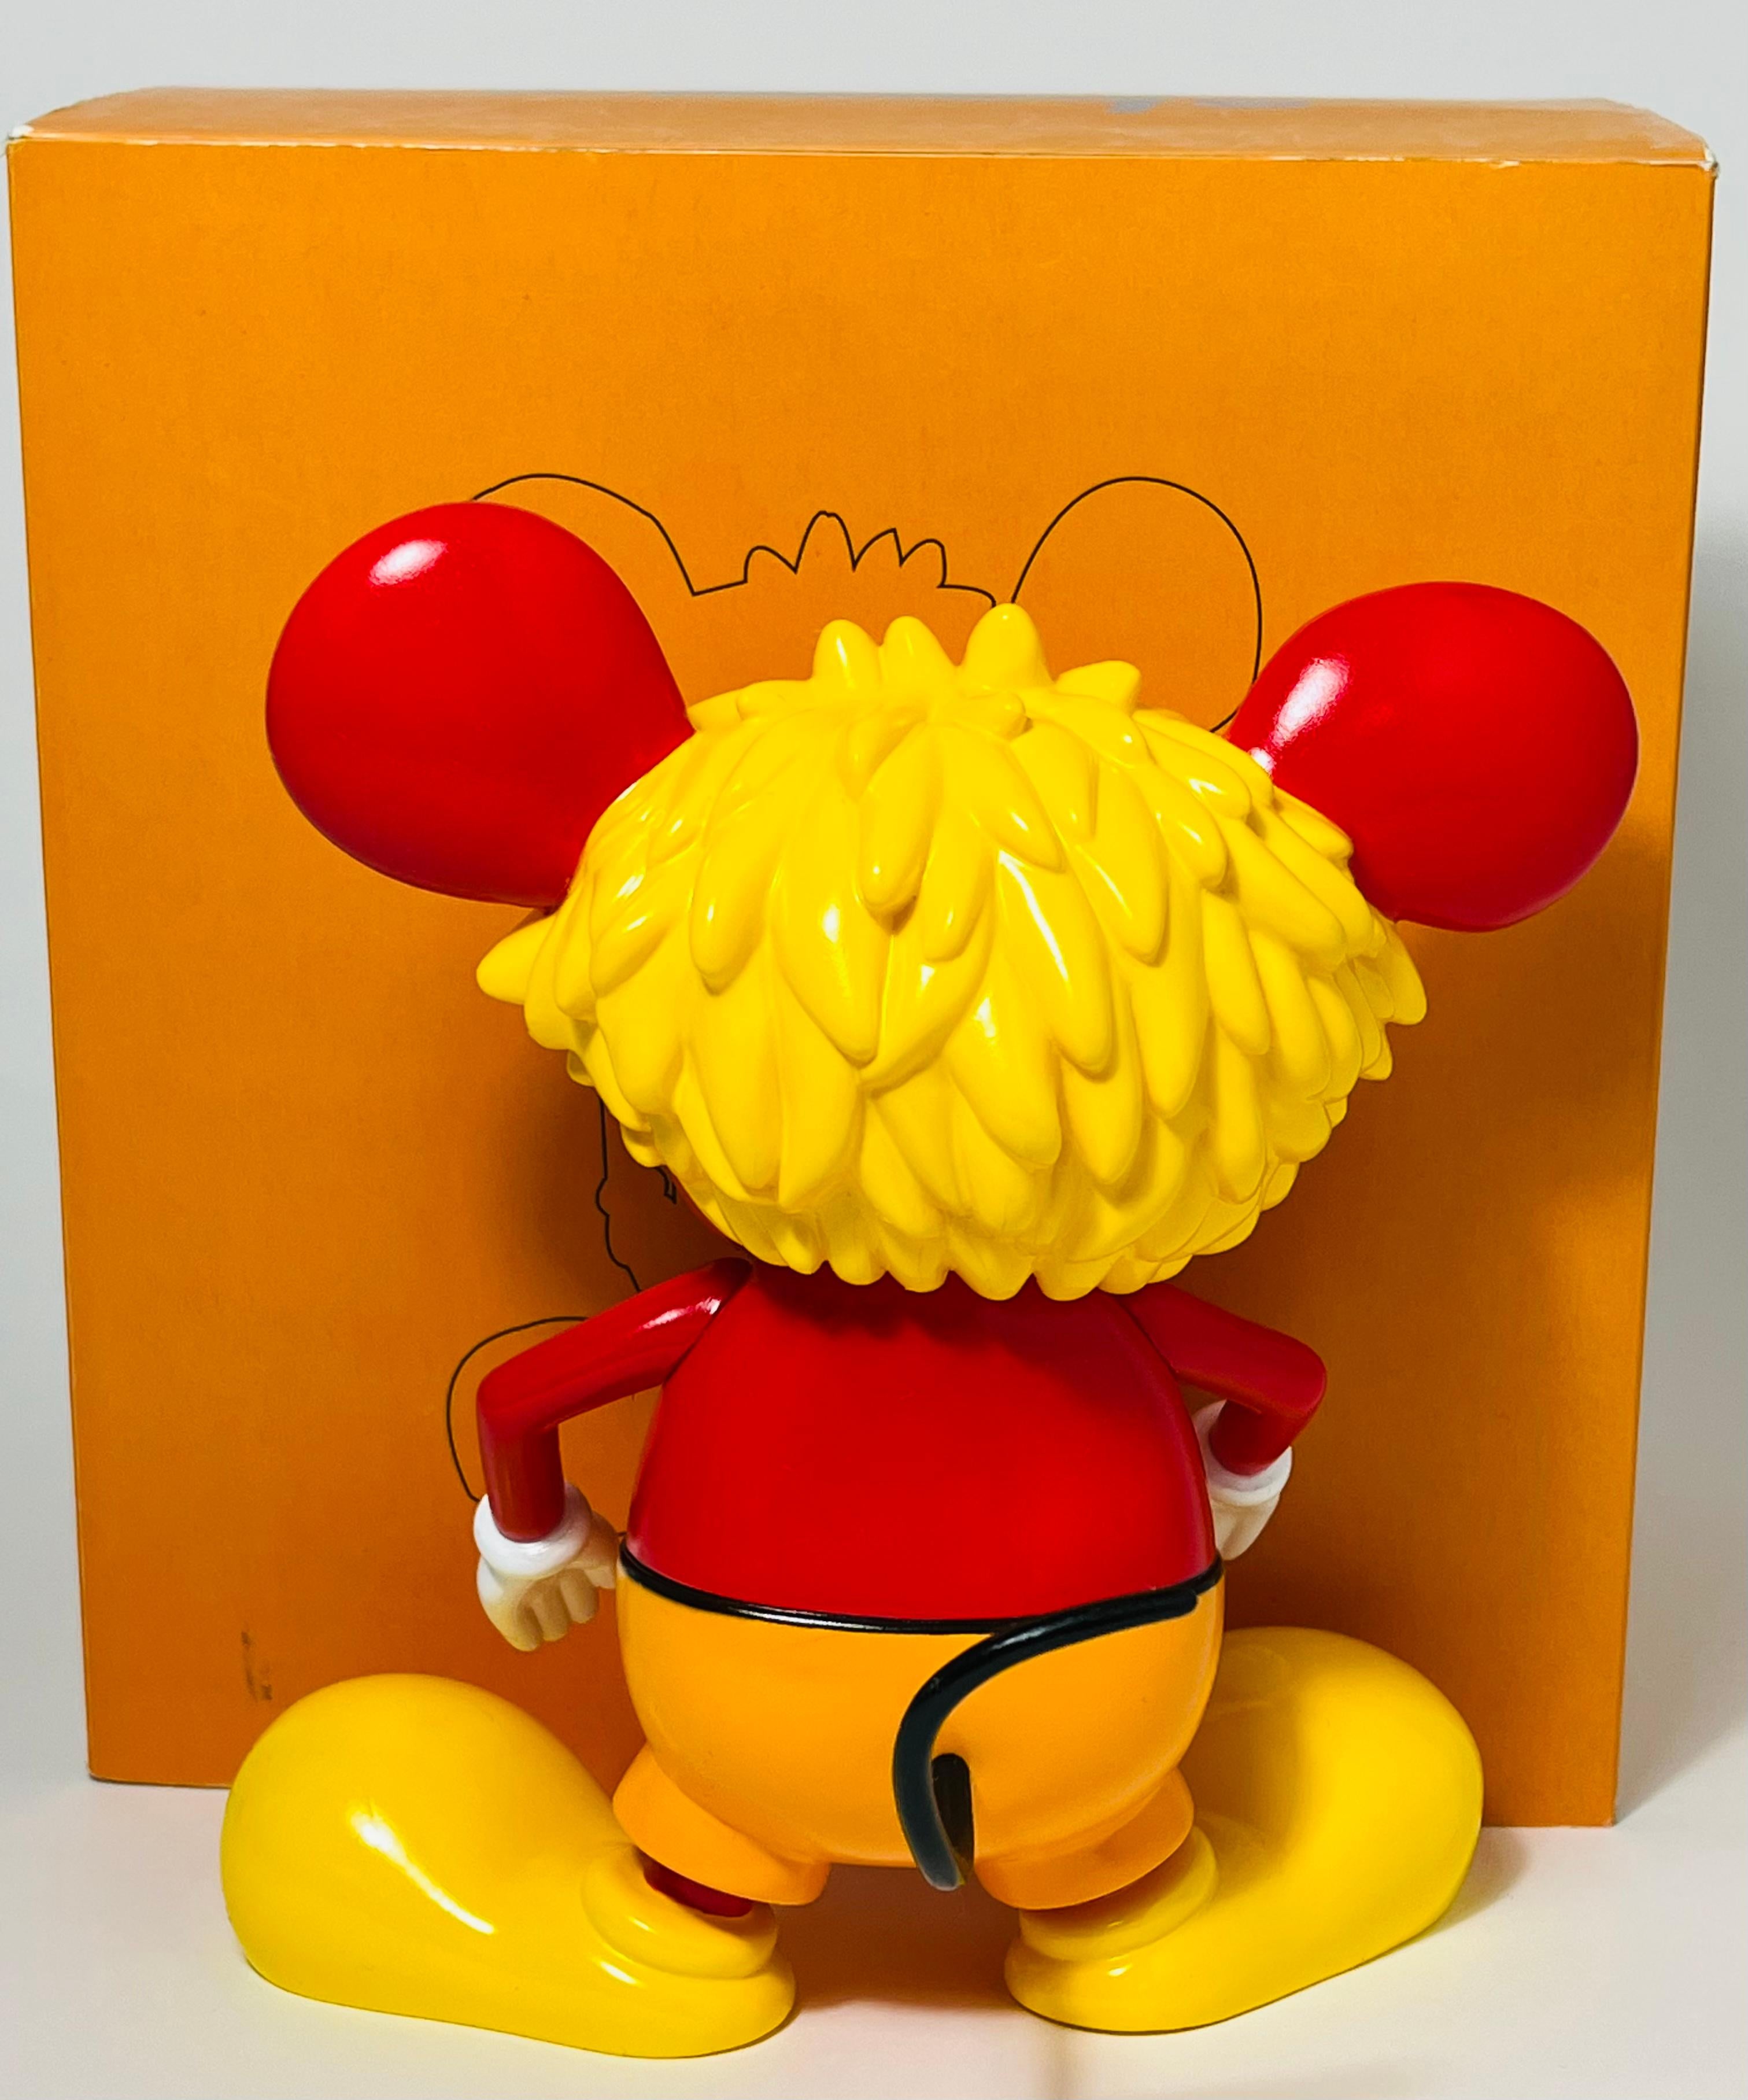 Keith Haring Andy Mouse art toy (Keith Haring Andy Warhol) - Pop Art Sculpture by (after) Keith Haring